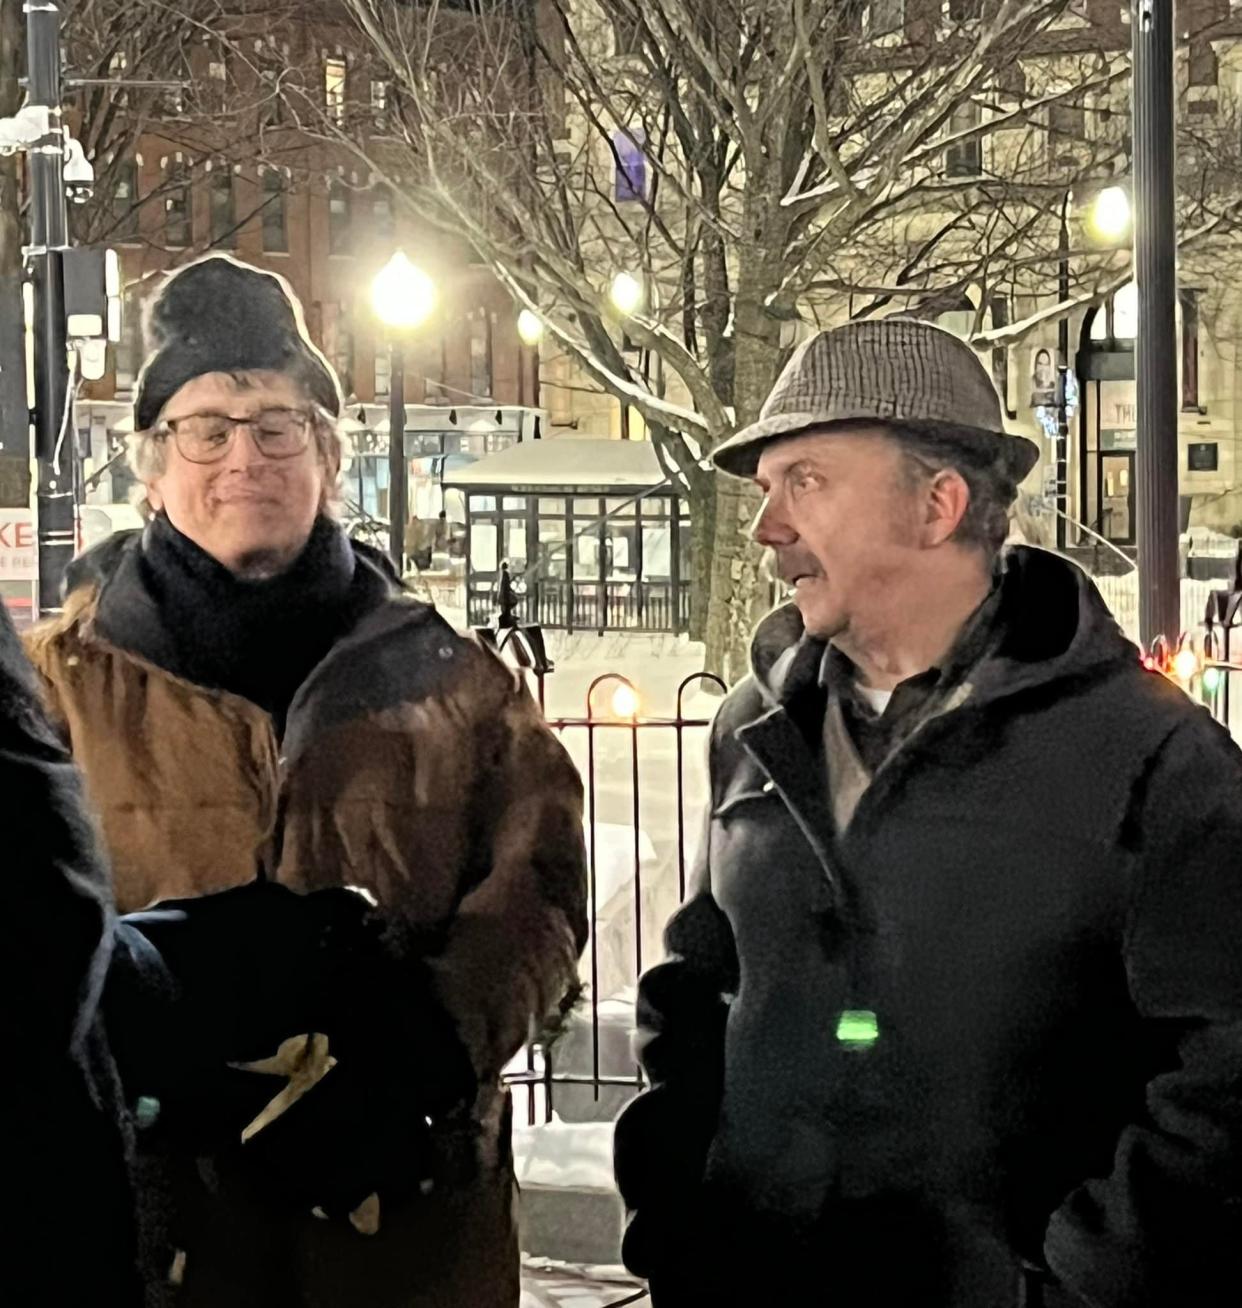 From left, director Alexander Payne and actor Paul Giamatti after wrapping a scene for "The Holdovers" shot on the Worcester Common Feb. 26, 2022.